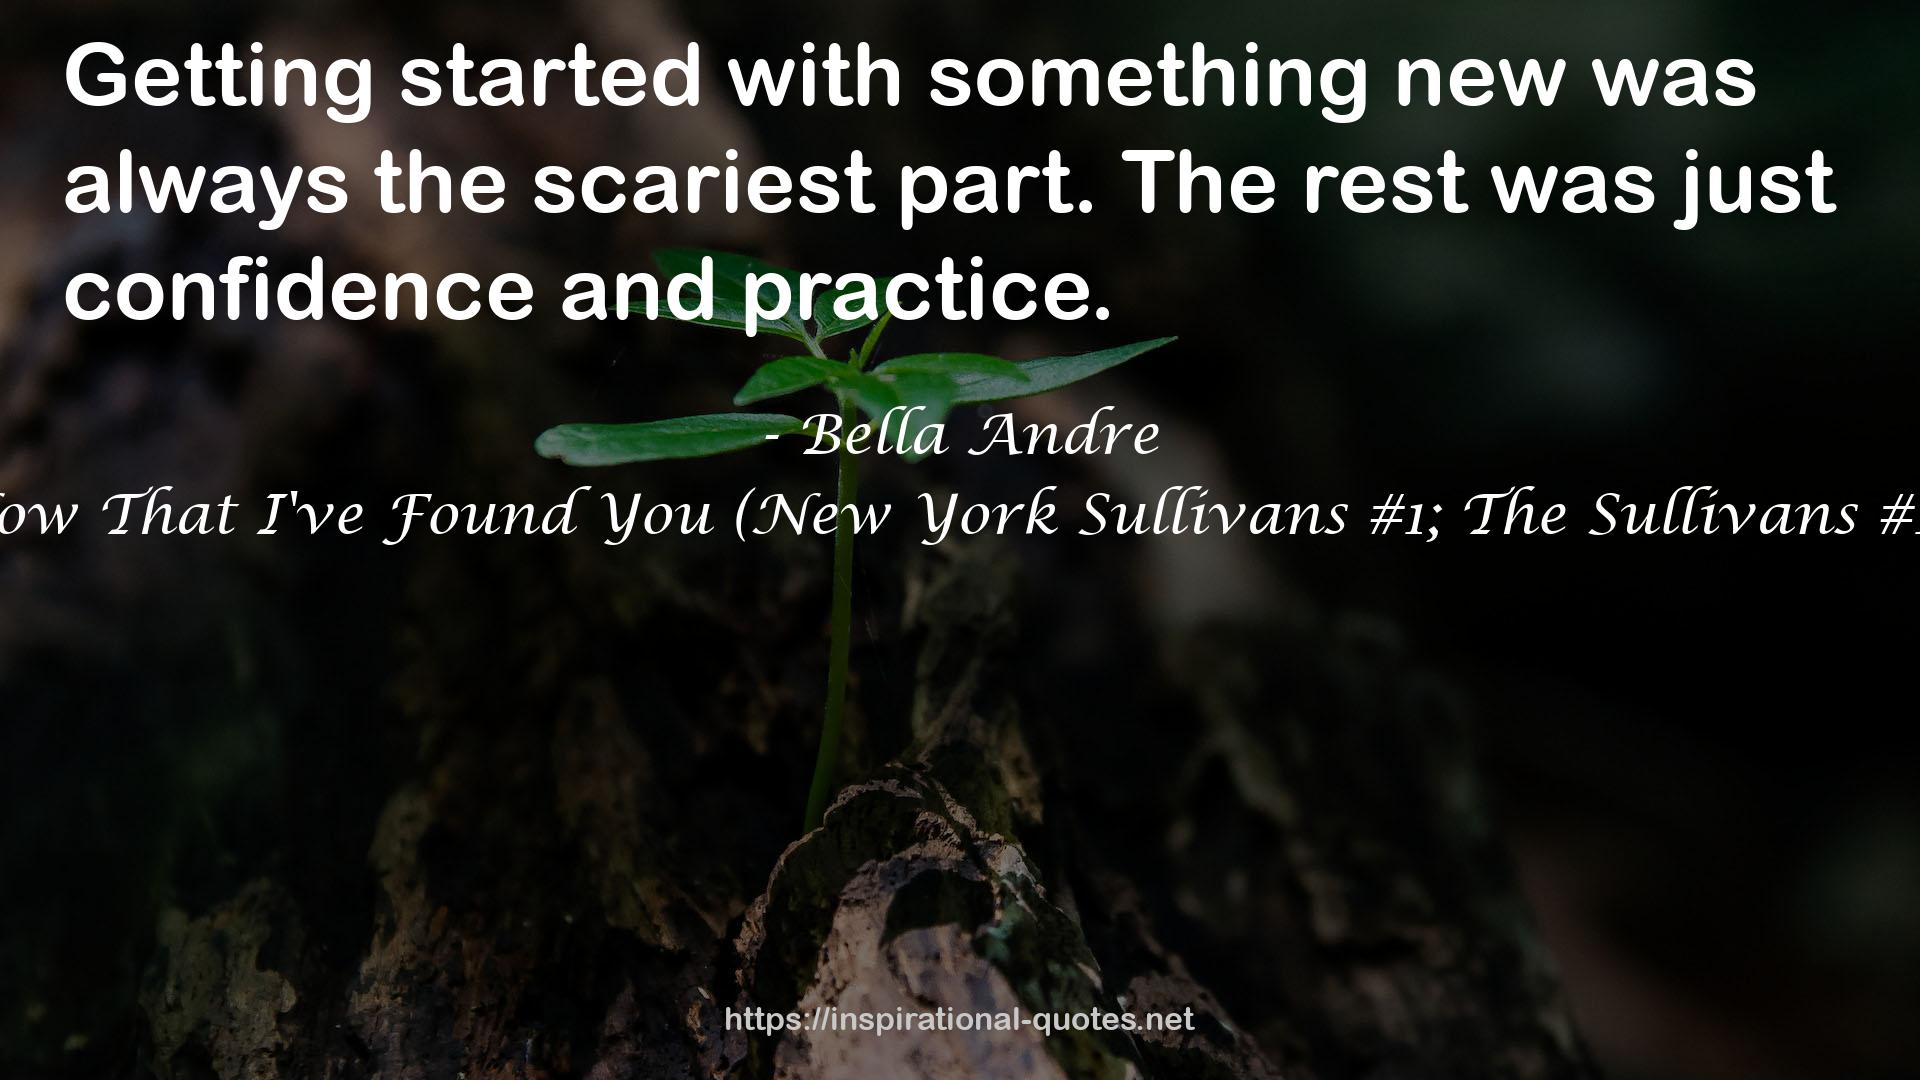 Now That I've Found You (New York Sullivans #1; The Sullivans #15) QUOTES